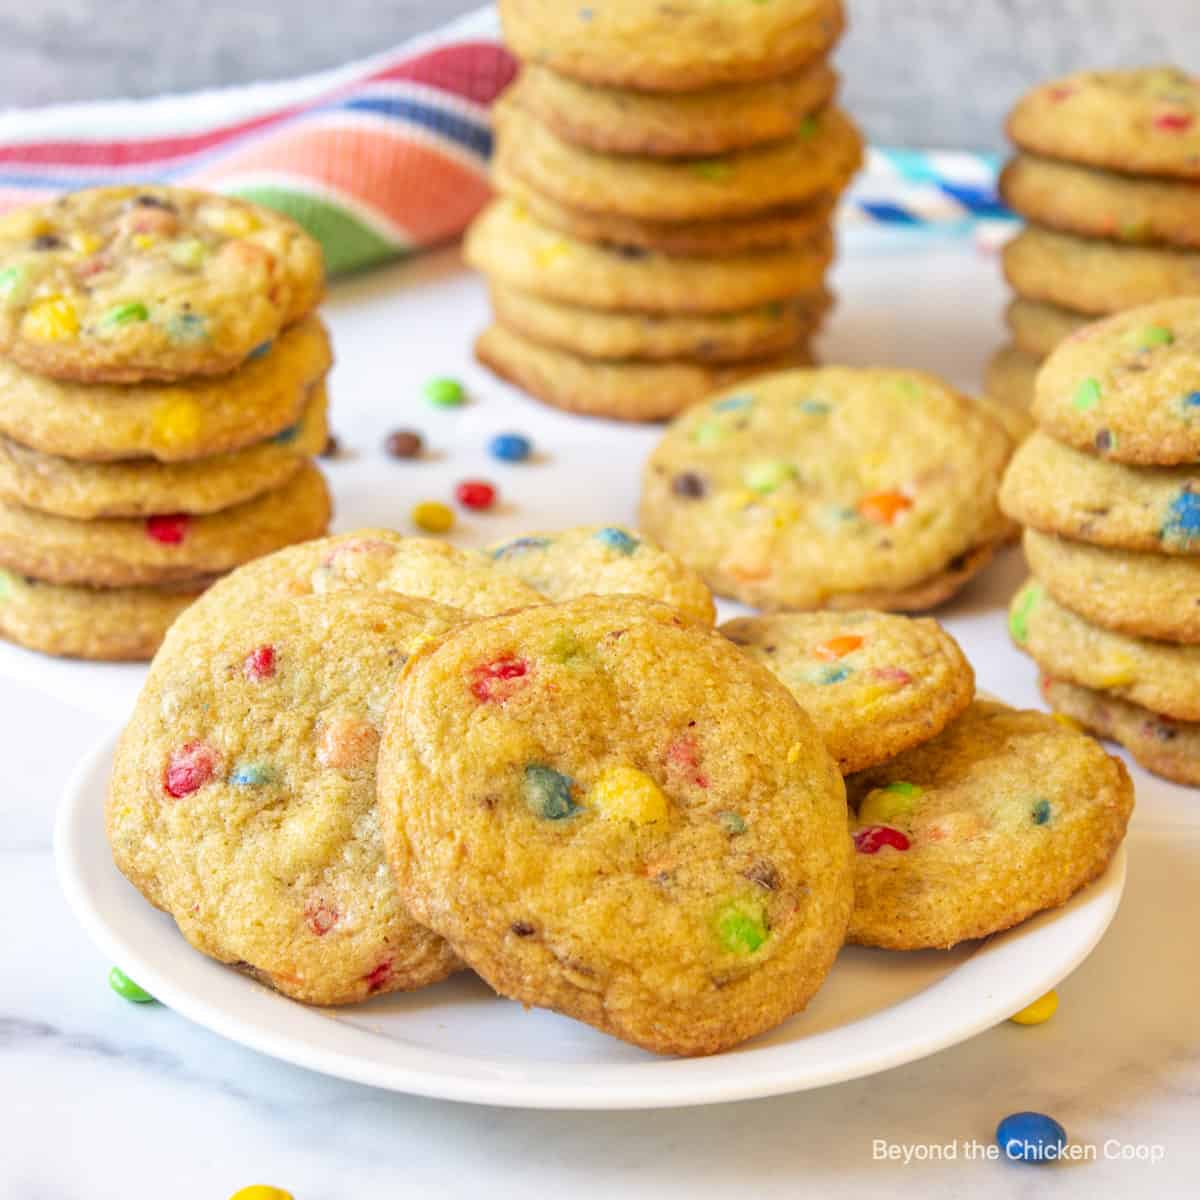 A plateful of cookies with candy pieces.